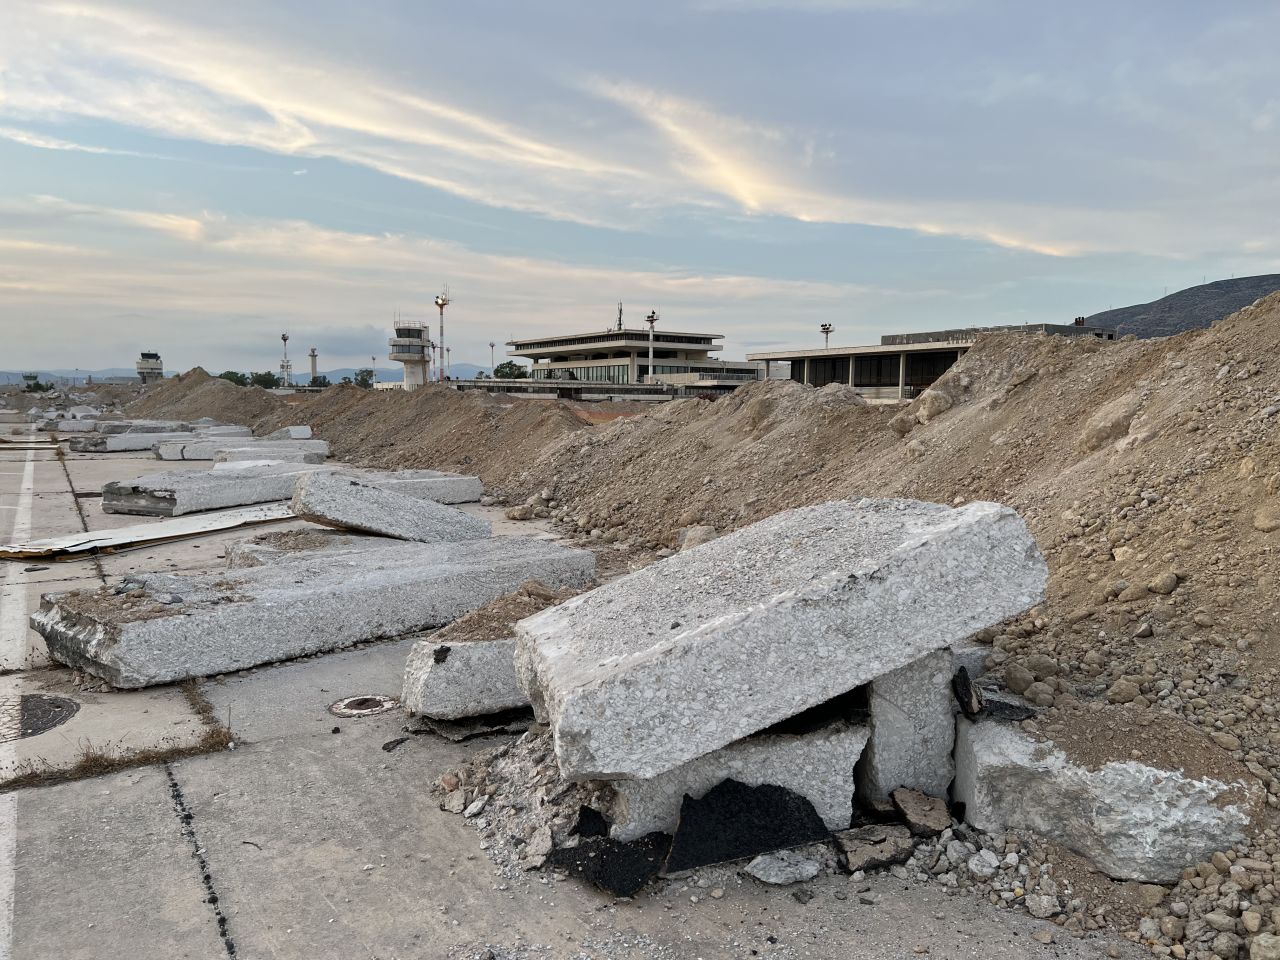 More than 300,000 square feet of concrete and tarmac from old runways will be repurposed for paving and benches in the new park, helping to reduce the carbon emissions generated by the development. 